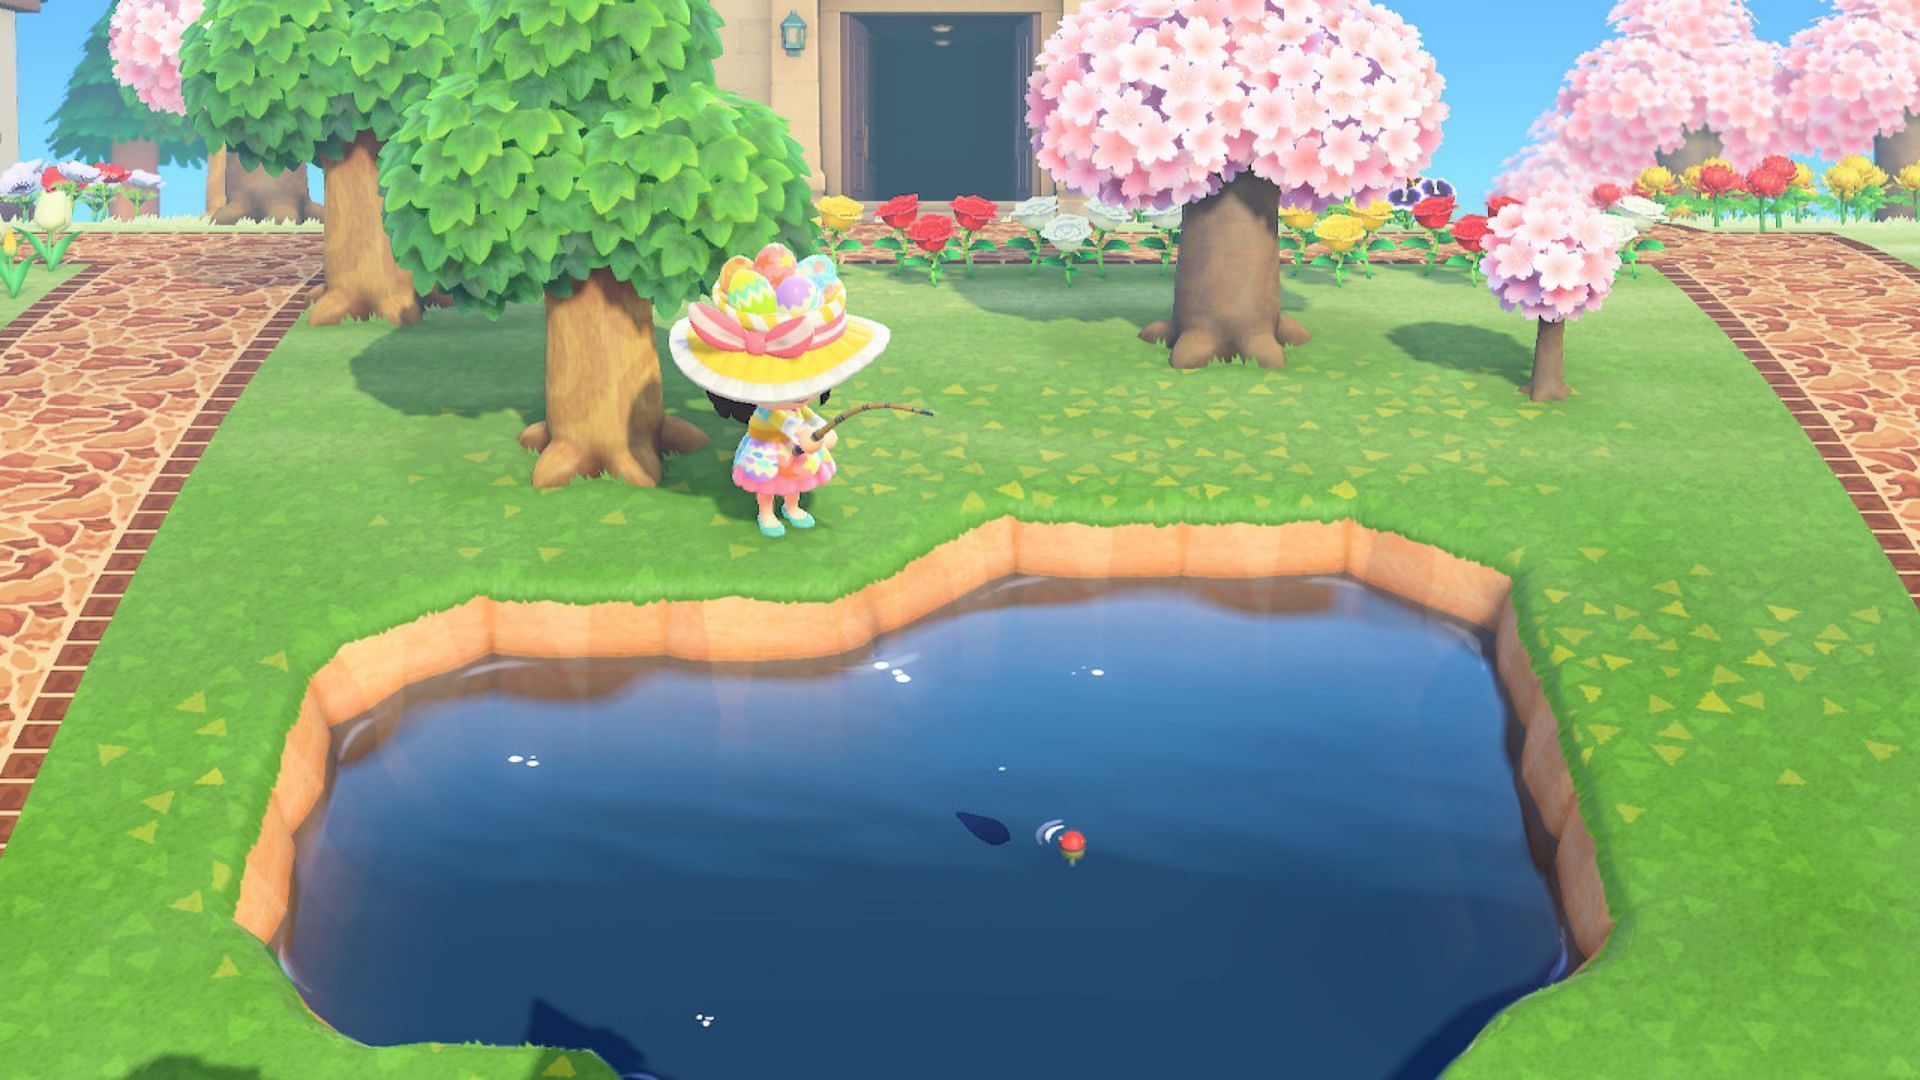 Using fish bait is actually quite simple in Animal Crossing: New Horizons (Image via Nintendo)